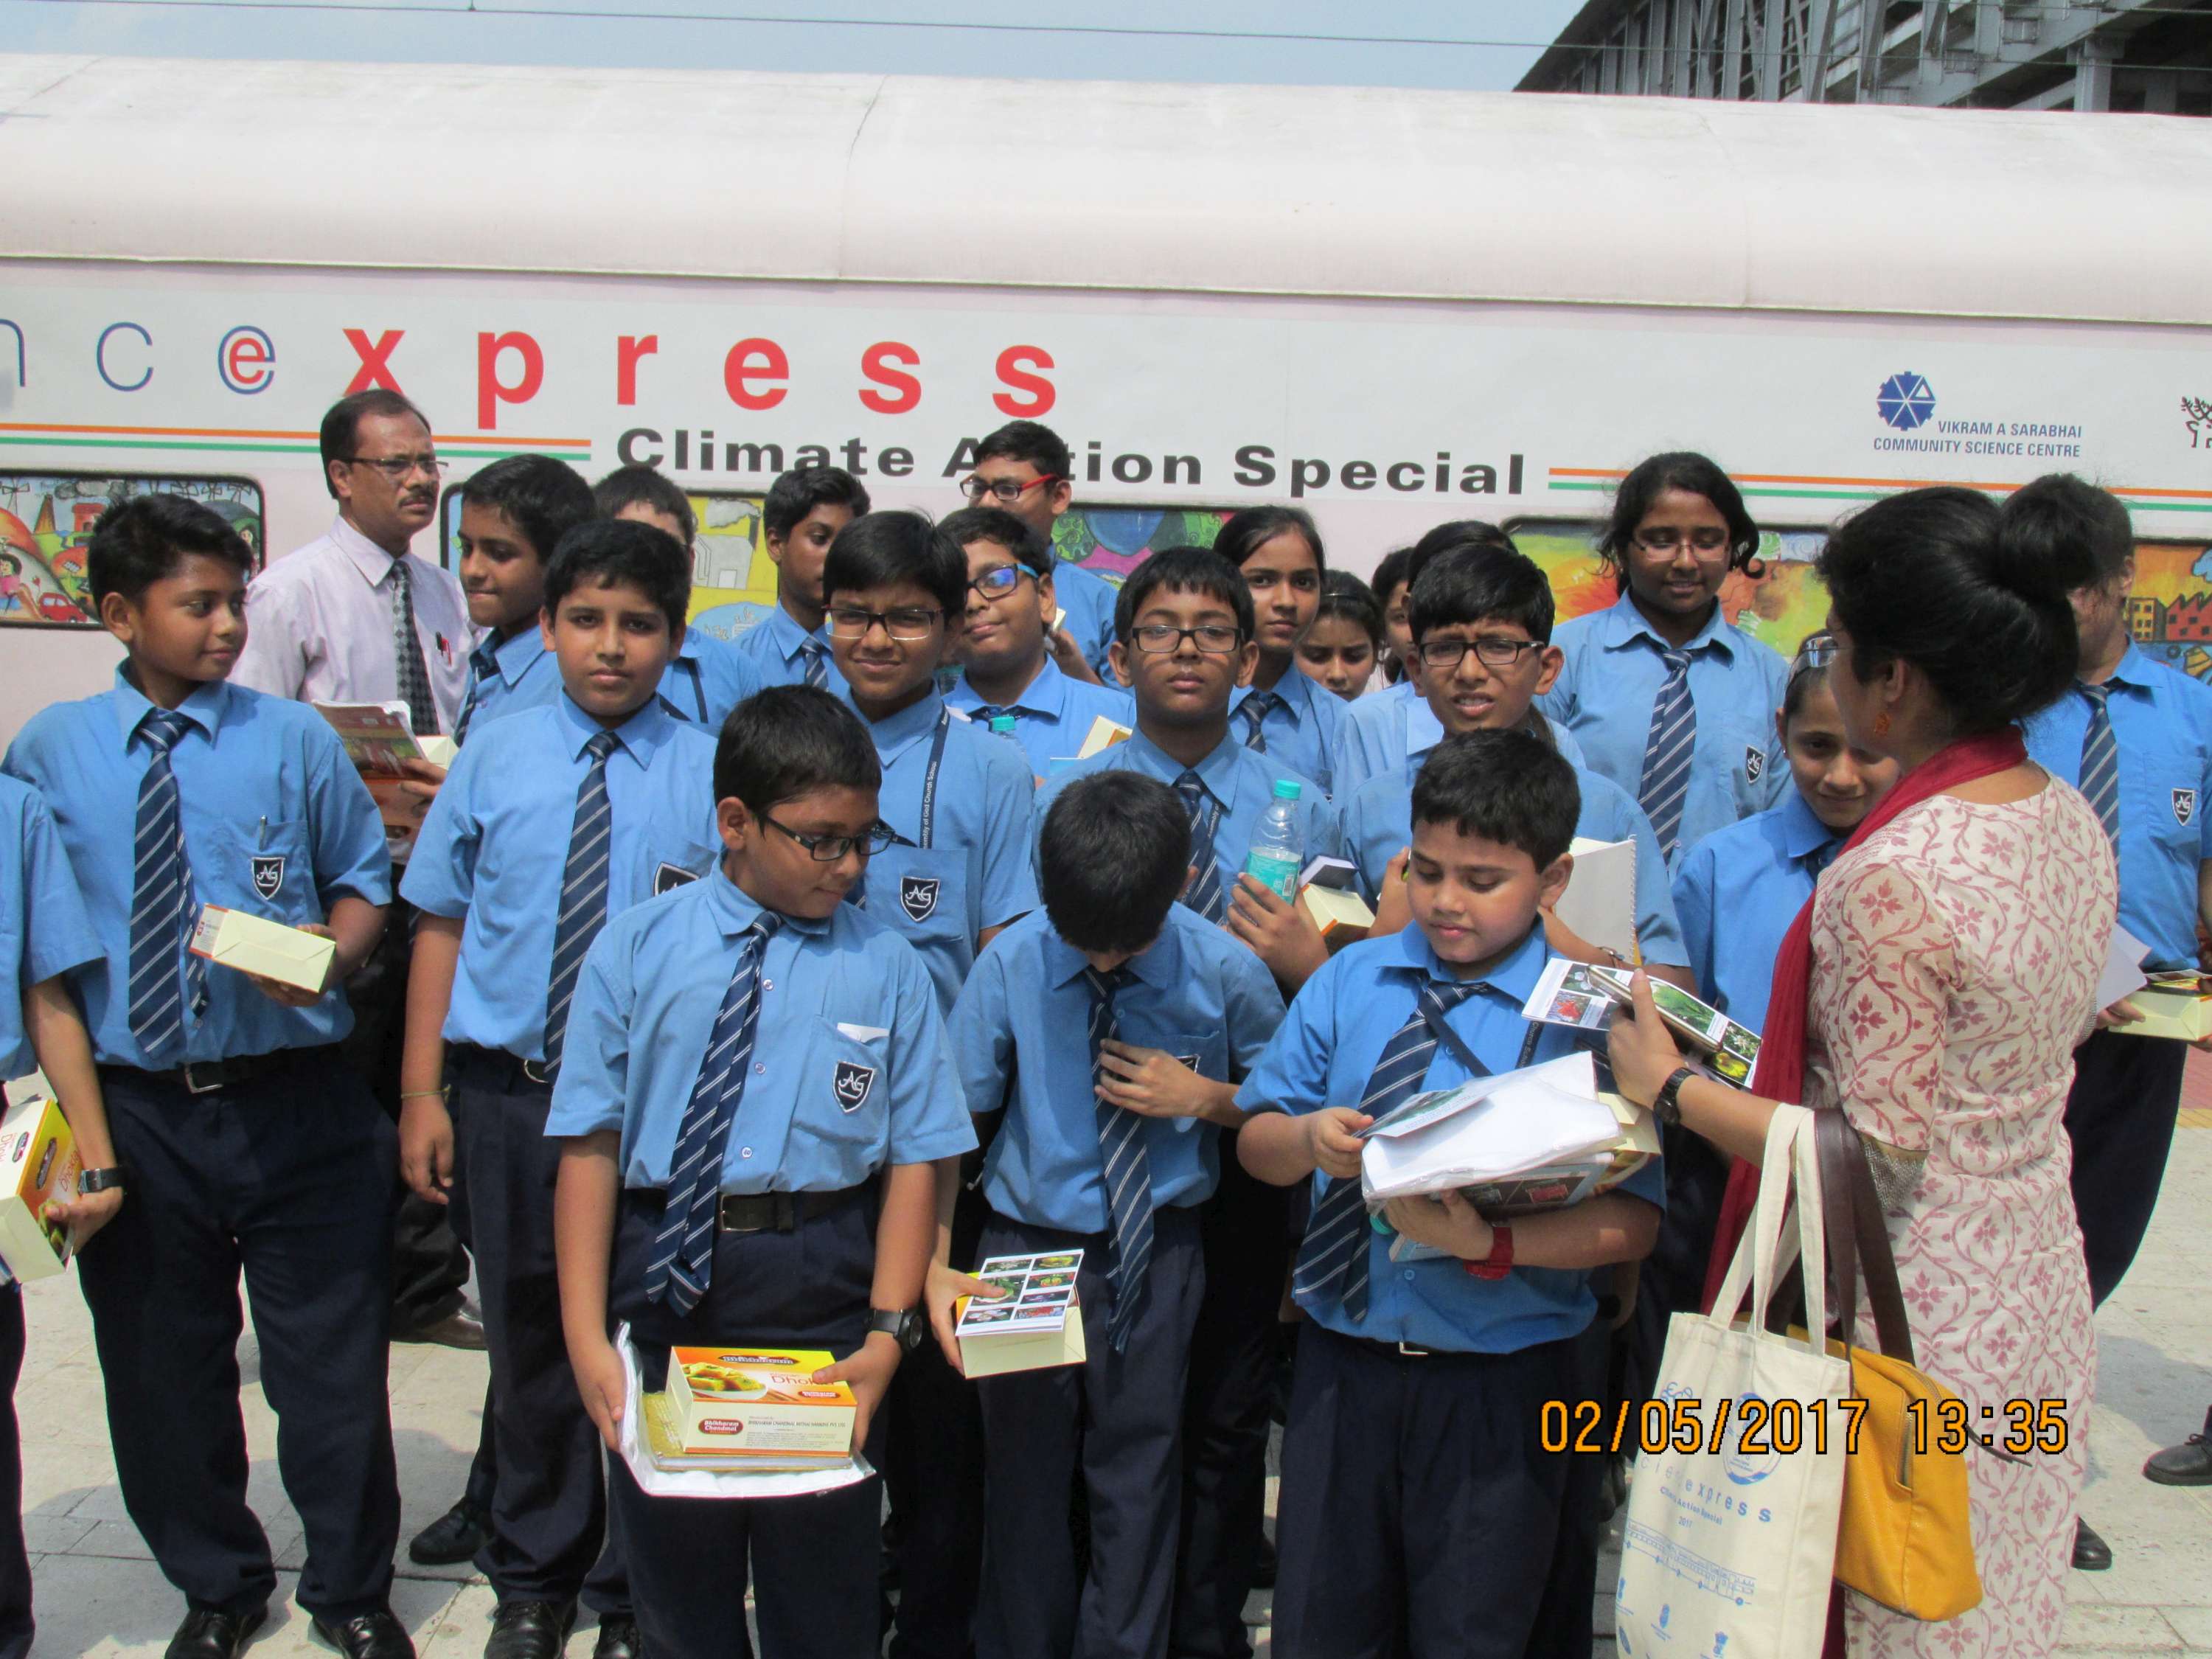 Science Express Climate Action Special (SECAS) Train 2017